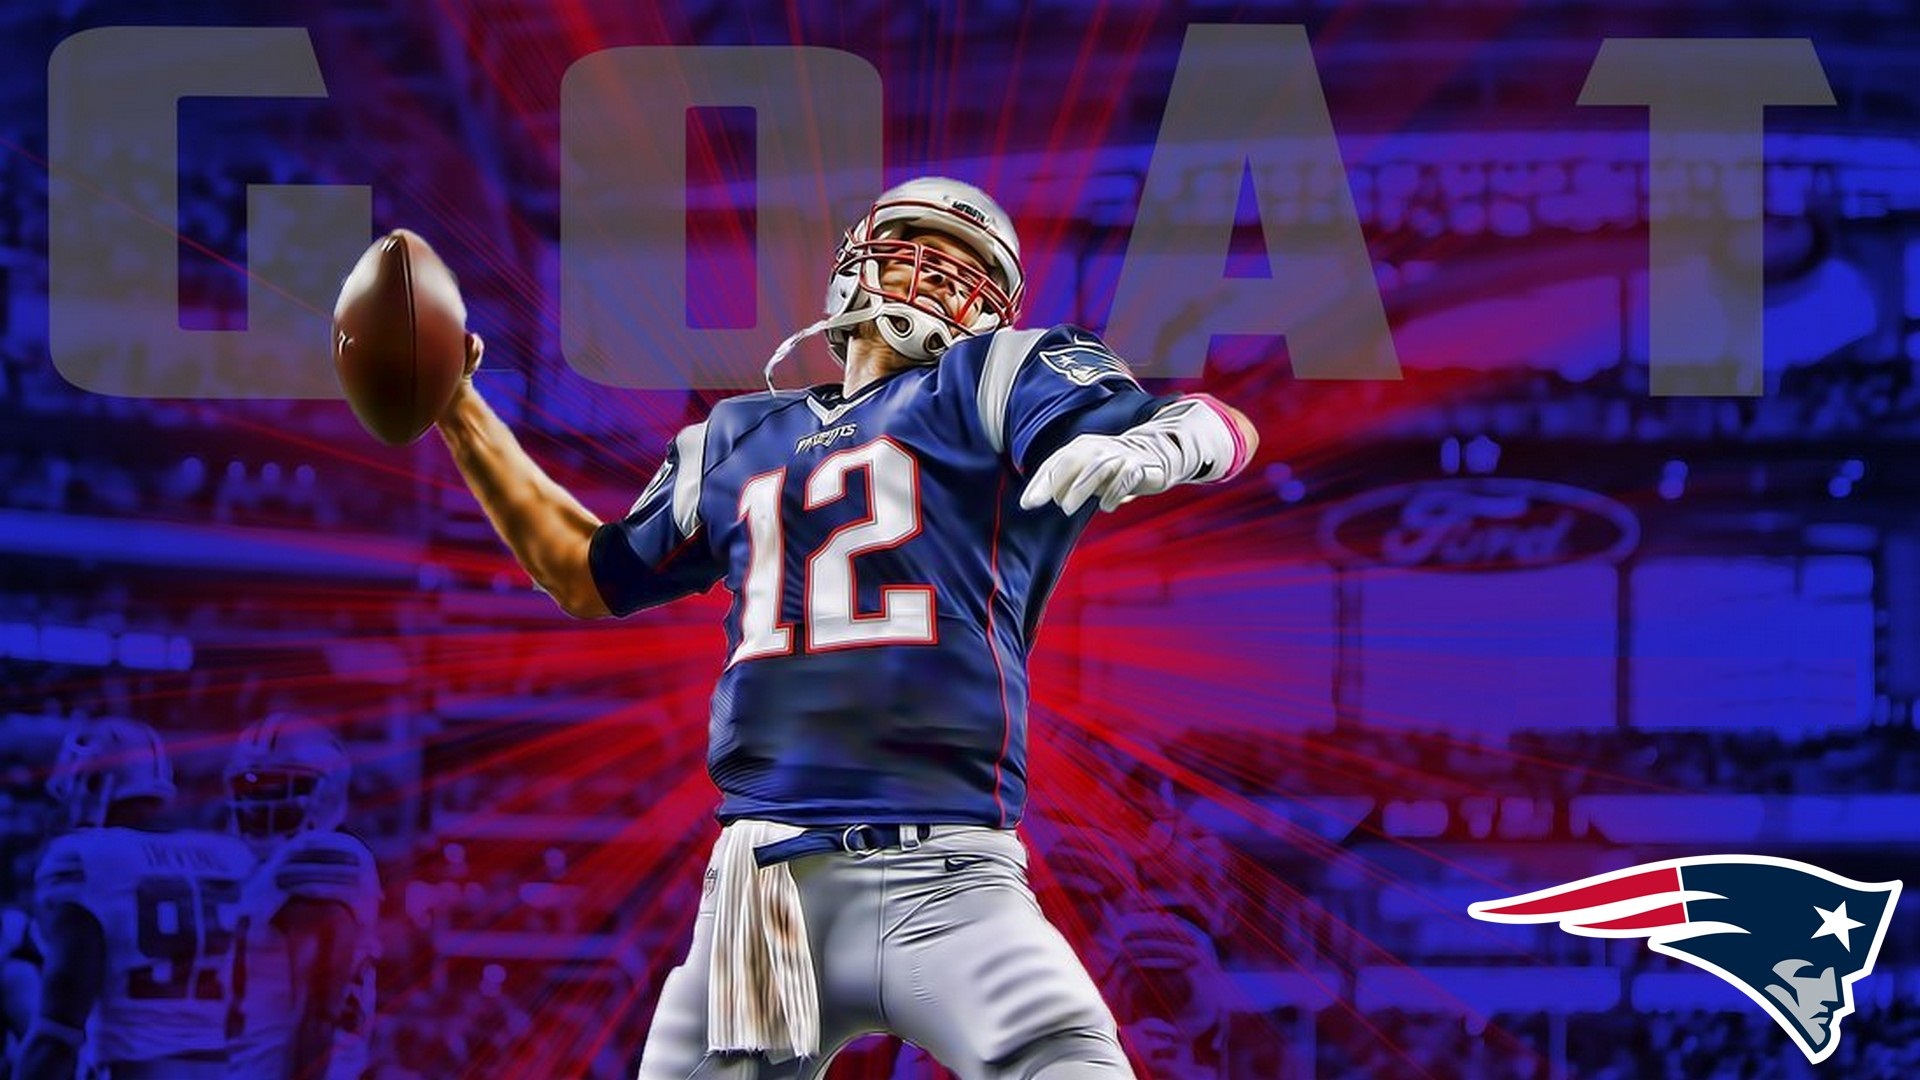 Tom Brady Super Bowl HD Wallpapers With Resolution 1920X1080 pixel. You can make this wallpaper for your Mac or Windows Desktop Background, iPhone, Android or Tablet and another Smartphone device for free